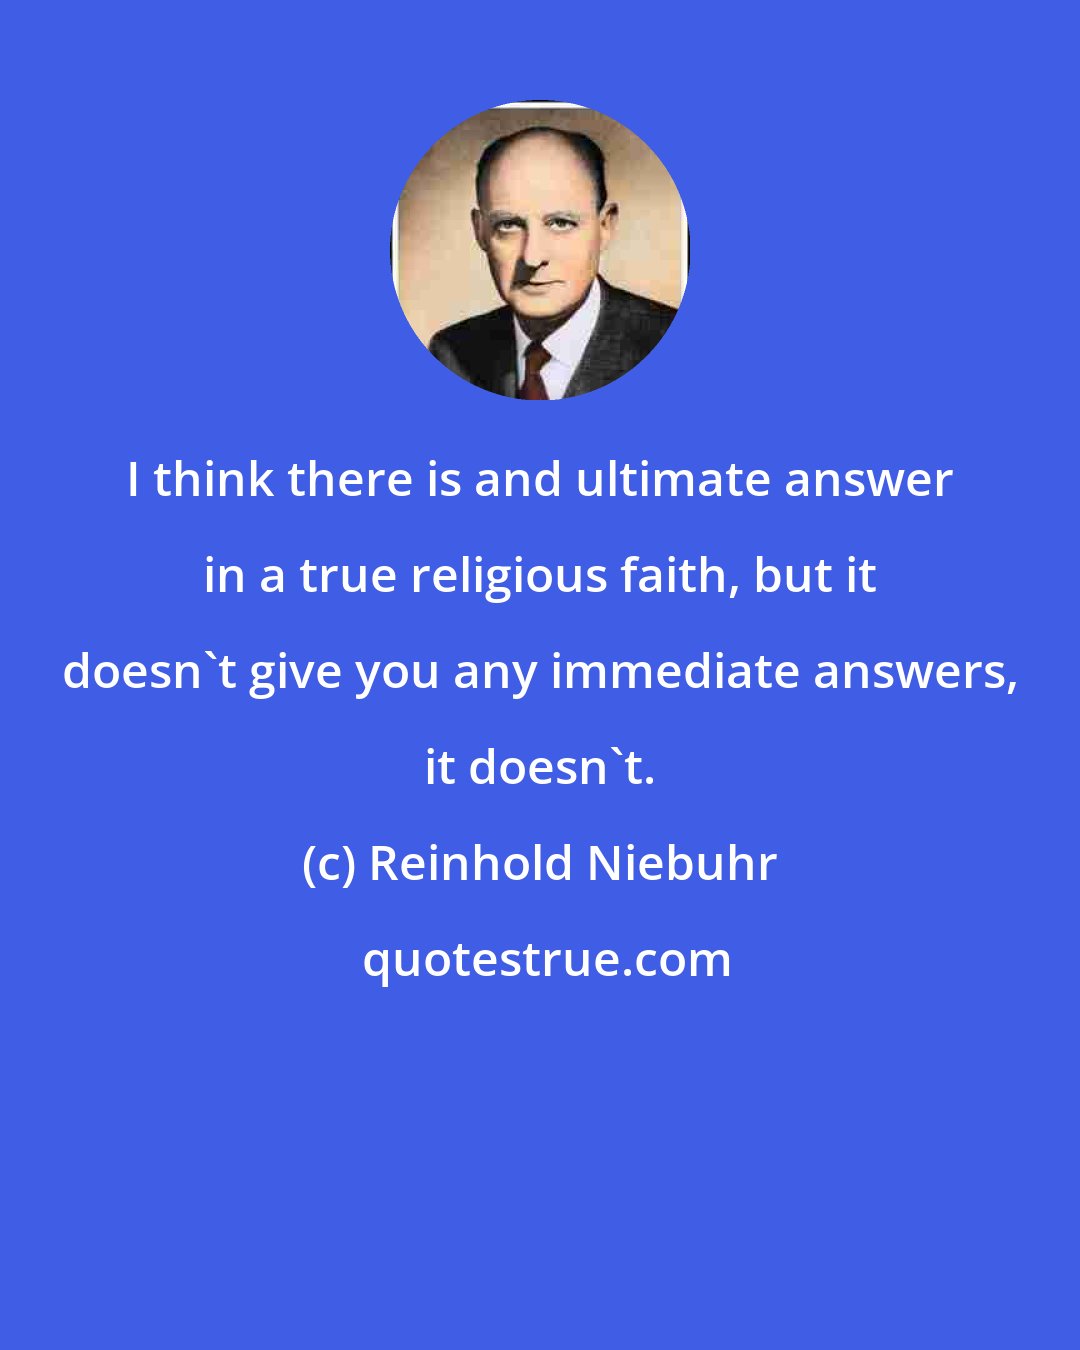 Reinhold Niebuhr: I think there is and ultimate answer in a true religious faith, but it doesn't give you any immediate answers, it doesn't.